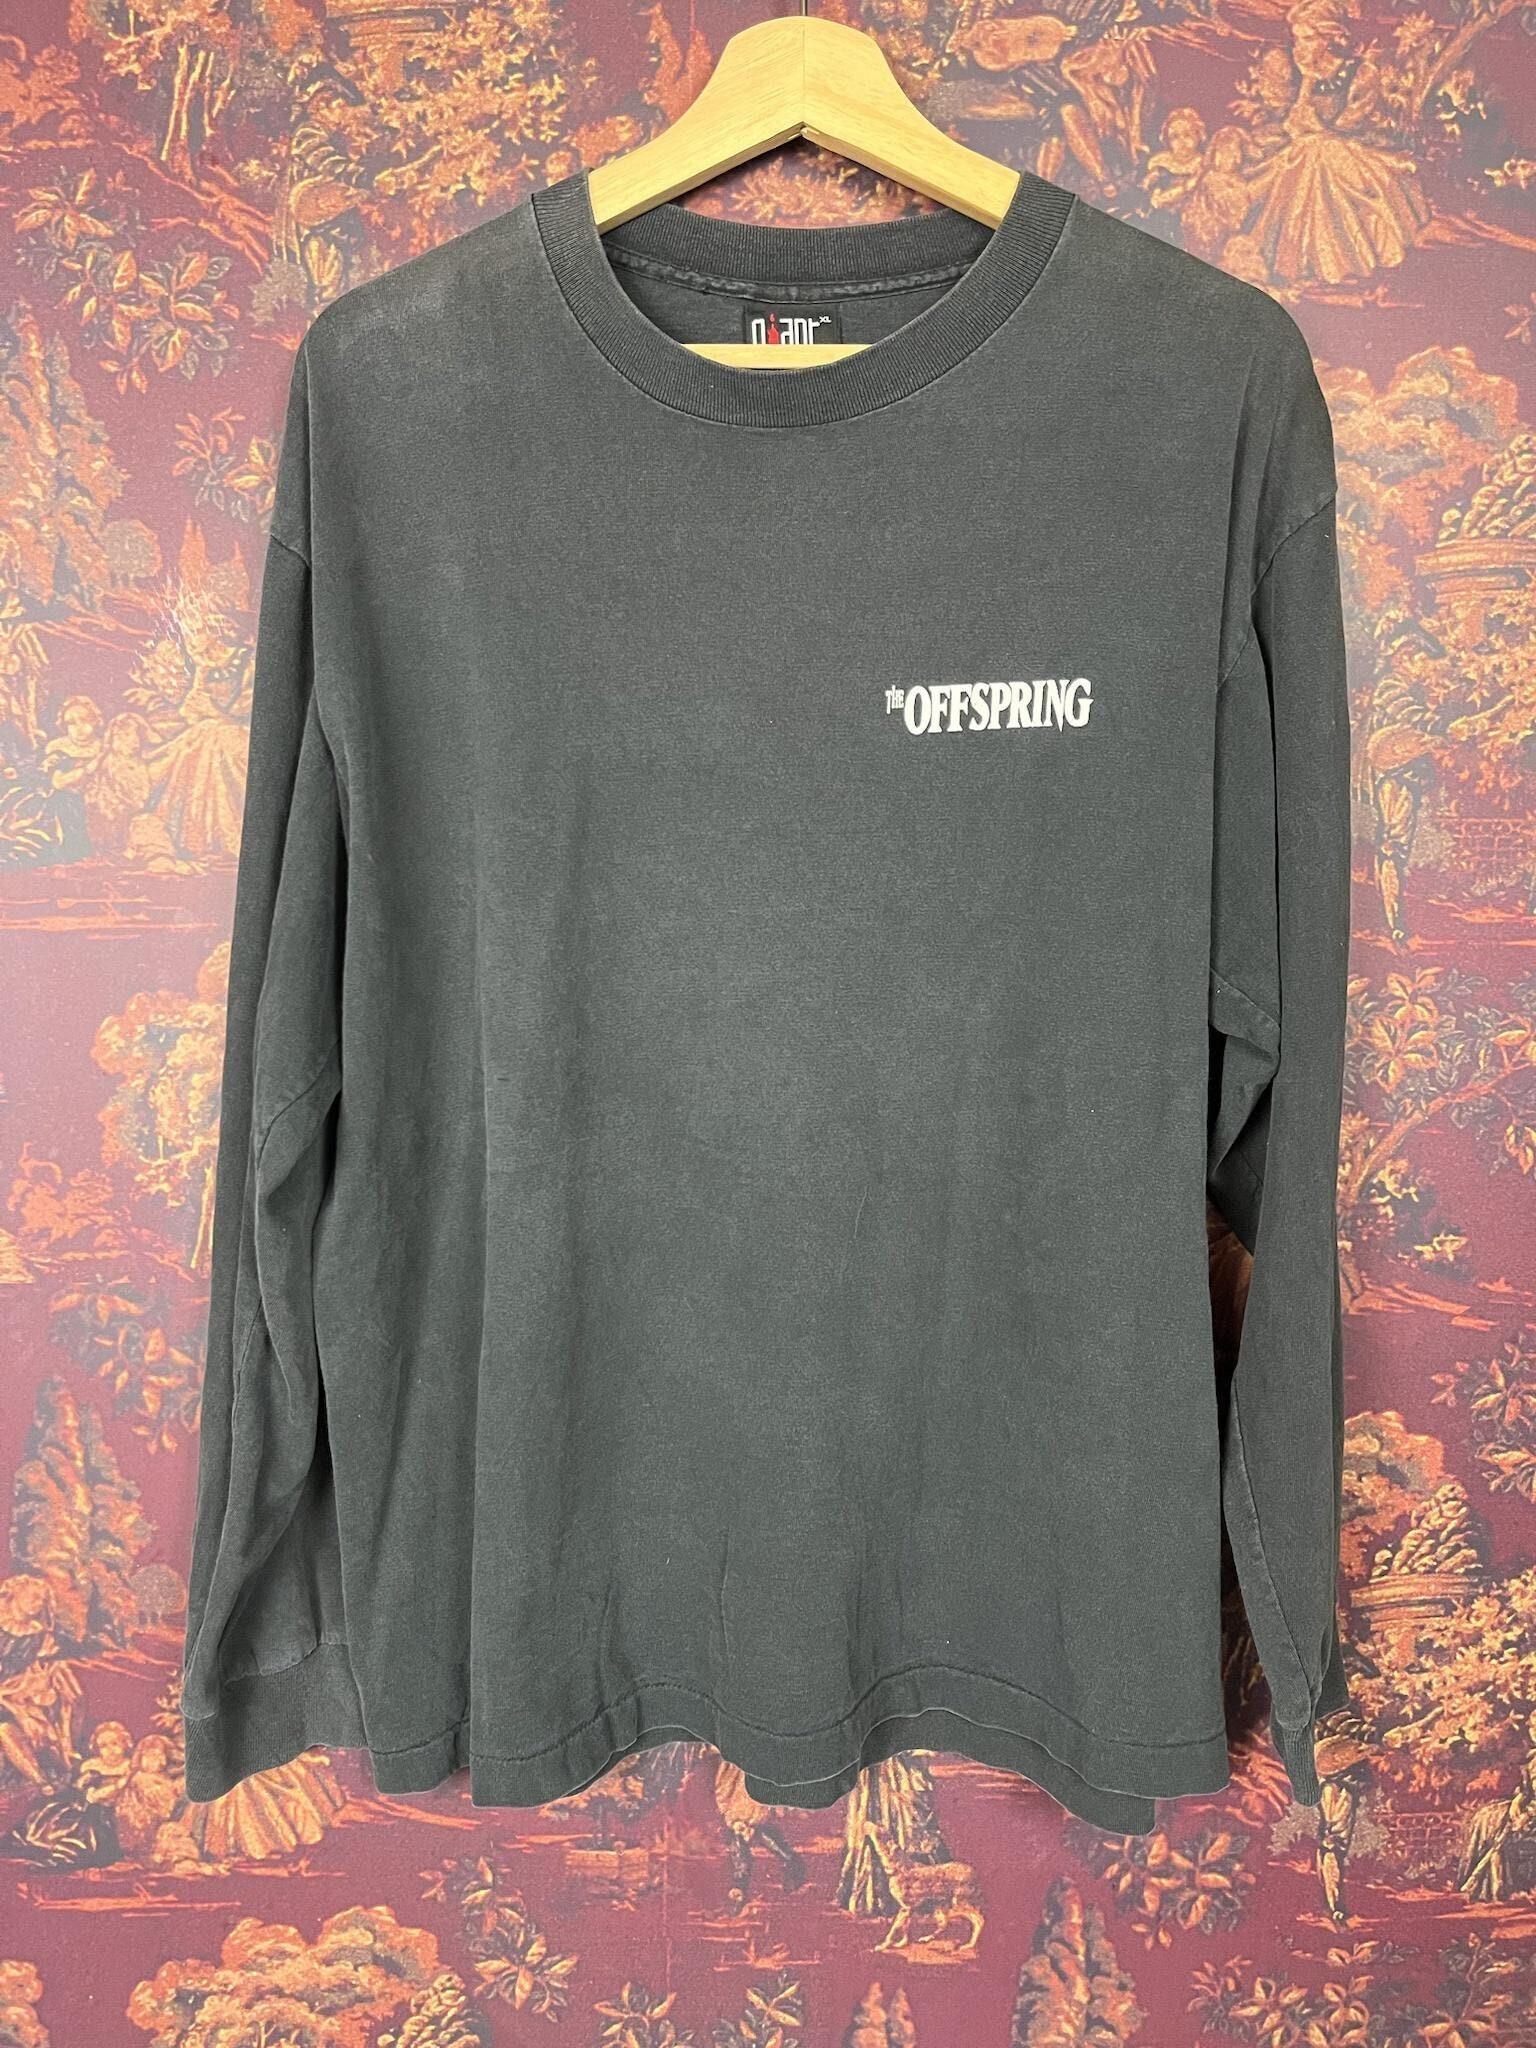 The Offspring Early 90s Long Sleeve Vintage Tee Shirt - Etsy